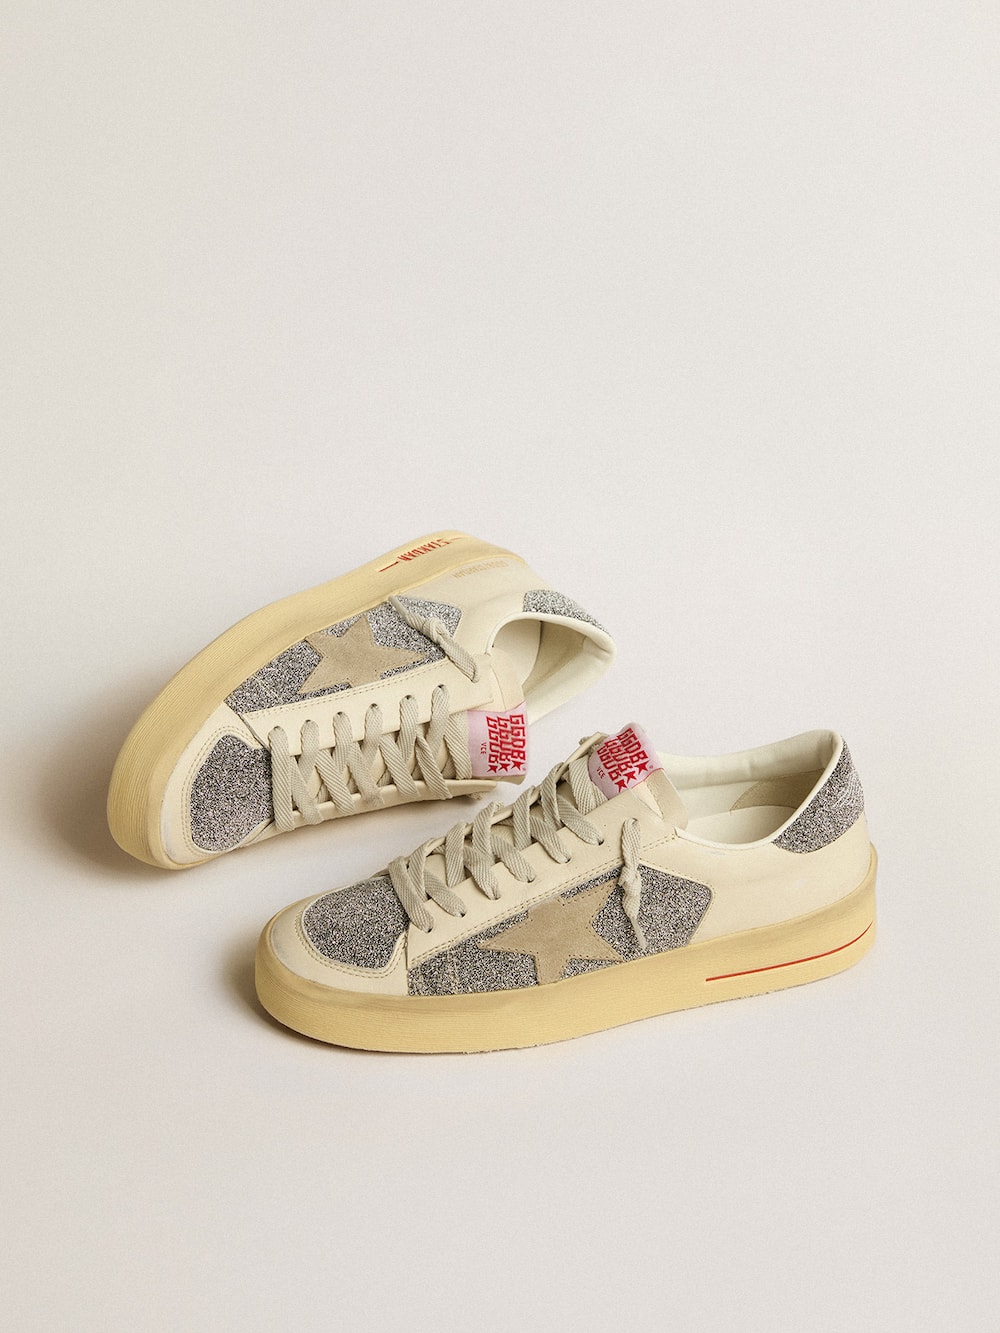 Golden Goose - Women's Stardan in suede with sand star and silver Swarovski crystal inserts in 